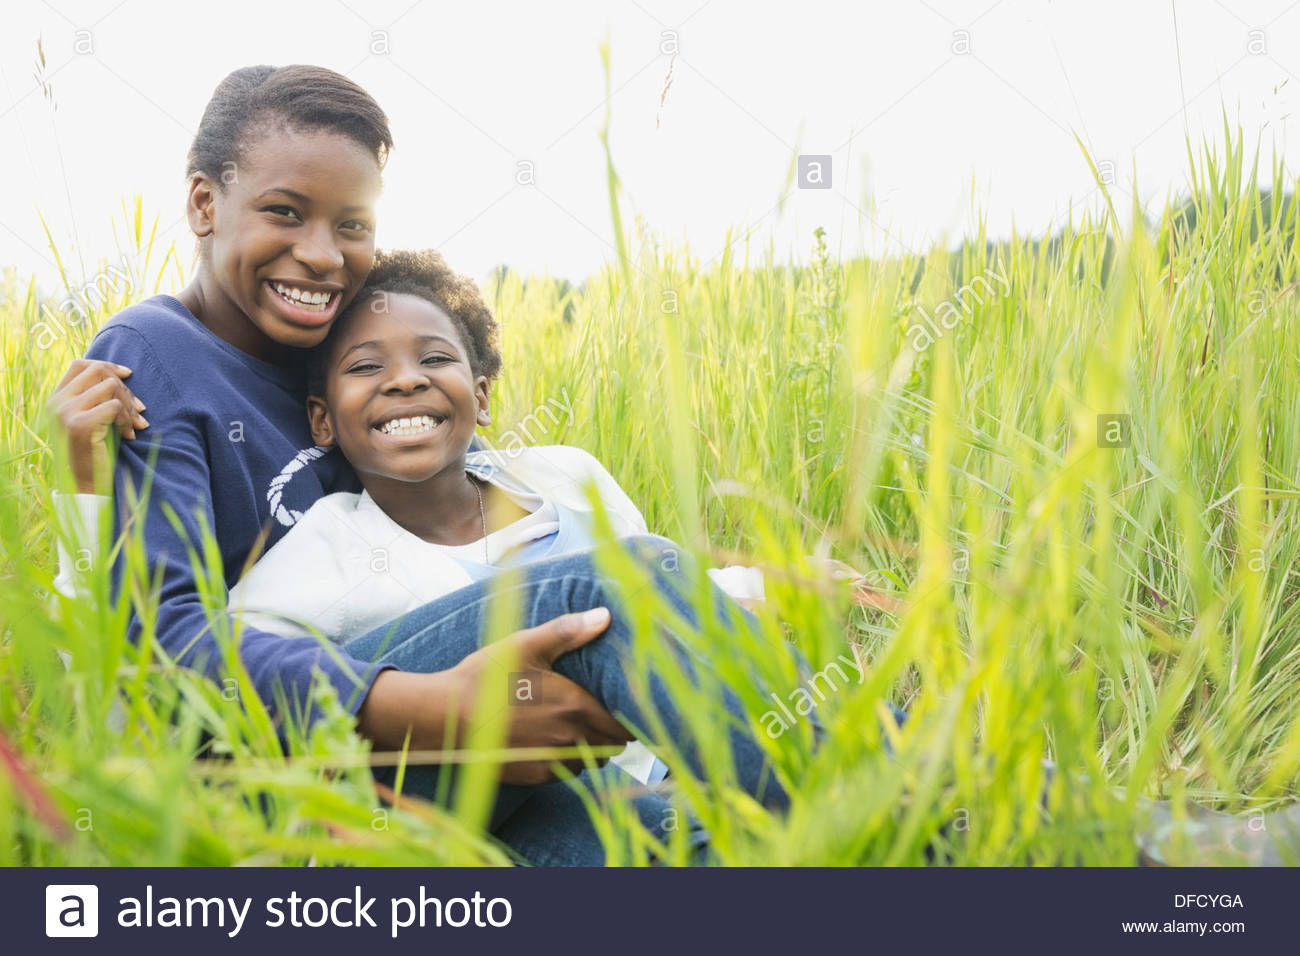 Portrait of loving sisters embracing outdoors Stock Photo